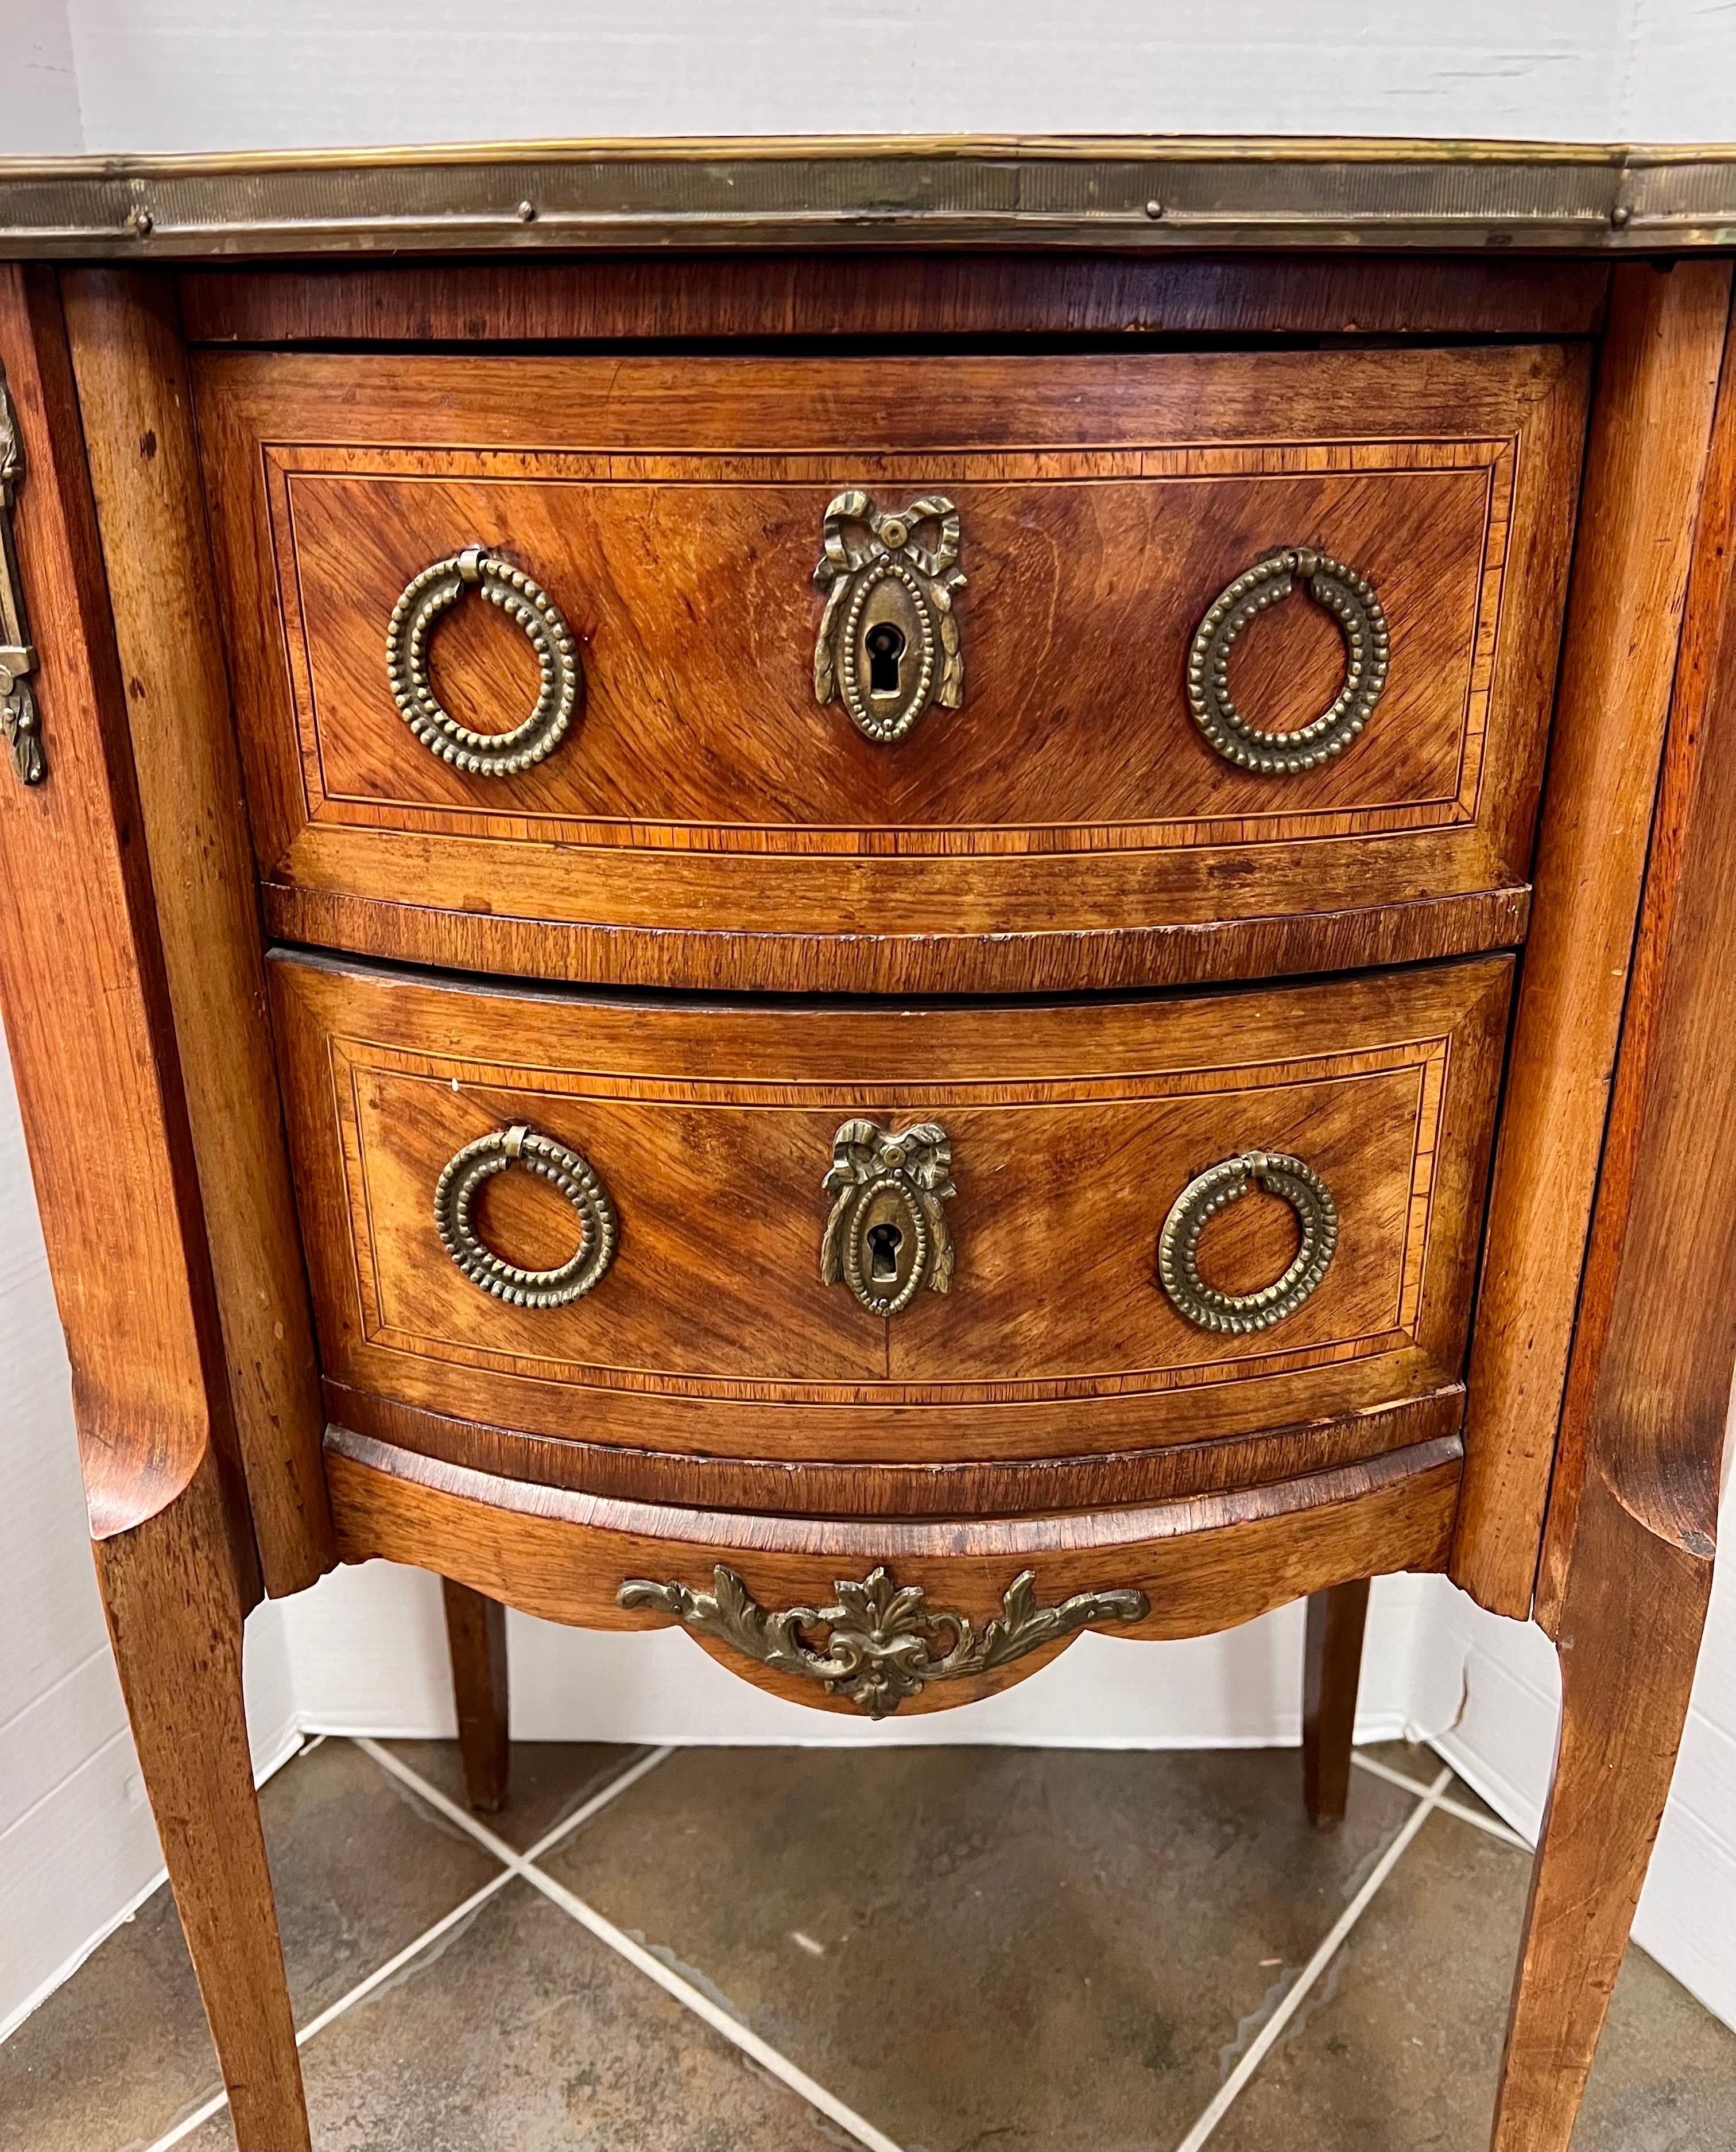 French Louis XV style commode nightstand features inlaid detail and pink marble top with brass gallery. Two drawers, cabriole legs, and mounted ormolu detailing.